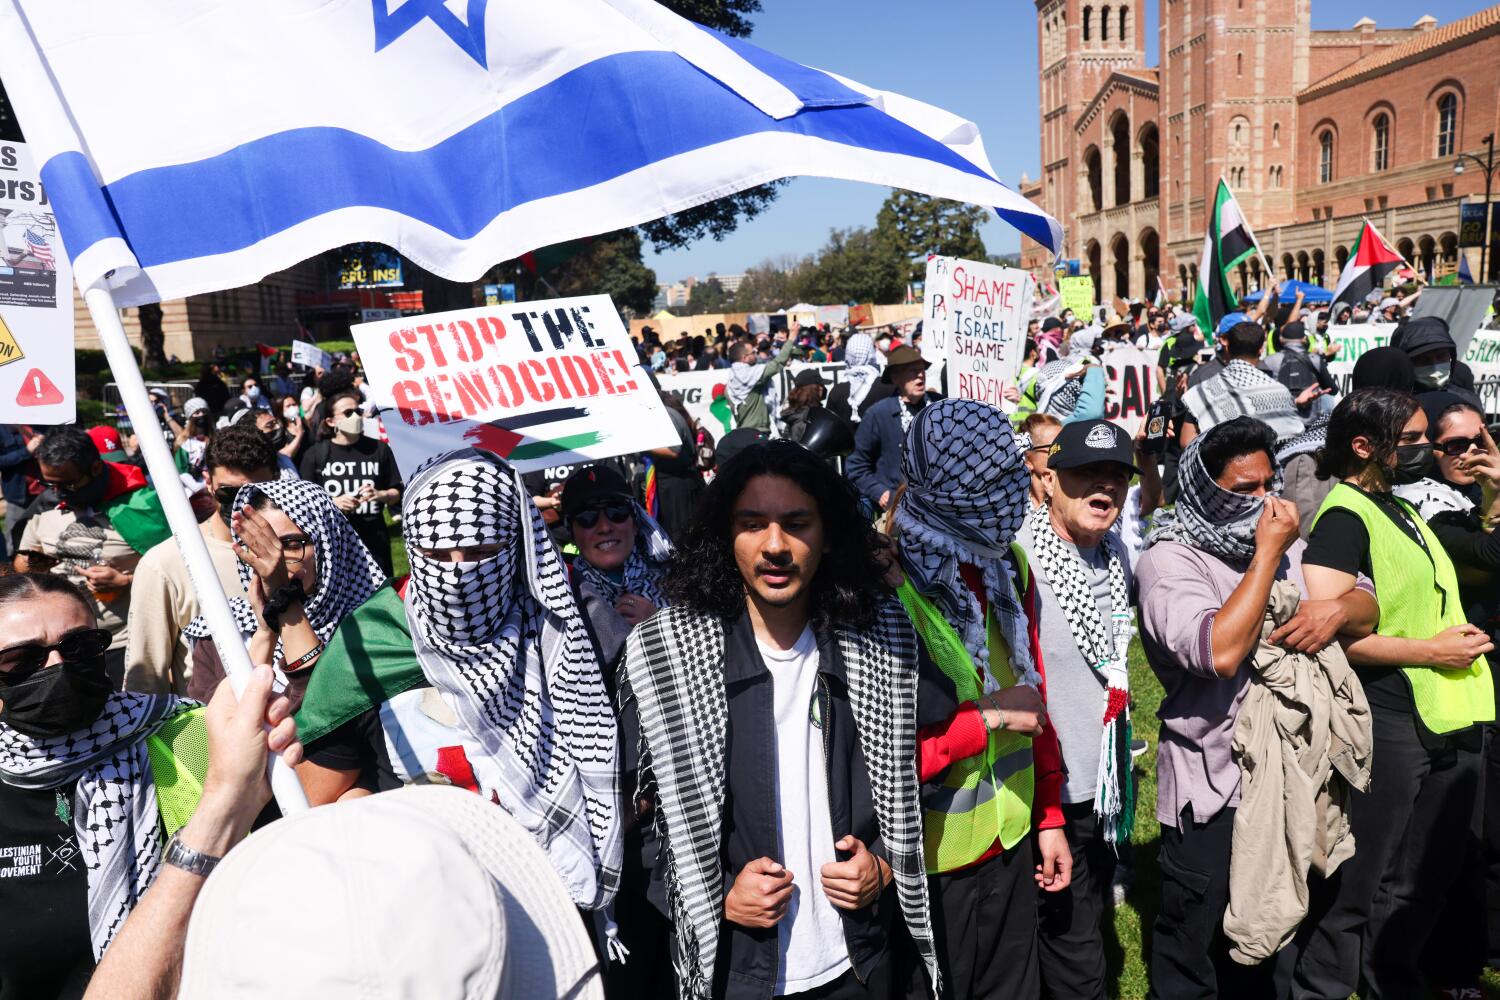 Dueling Gaza protests at UCLA draw hundreds as USC sees peaceful demonstration